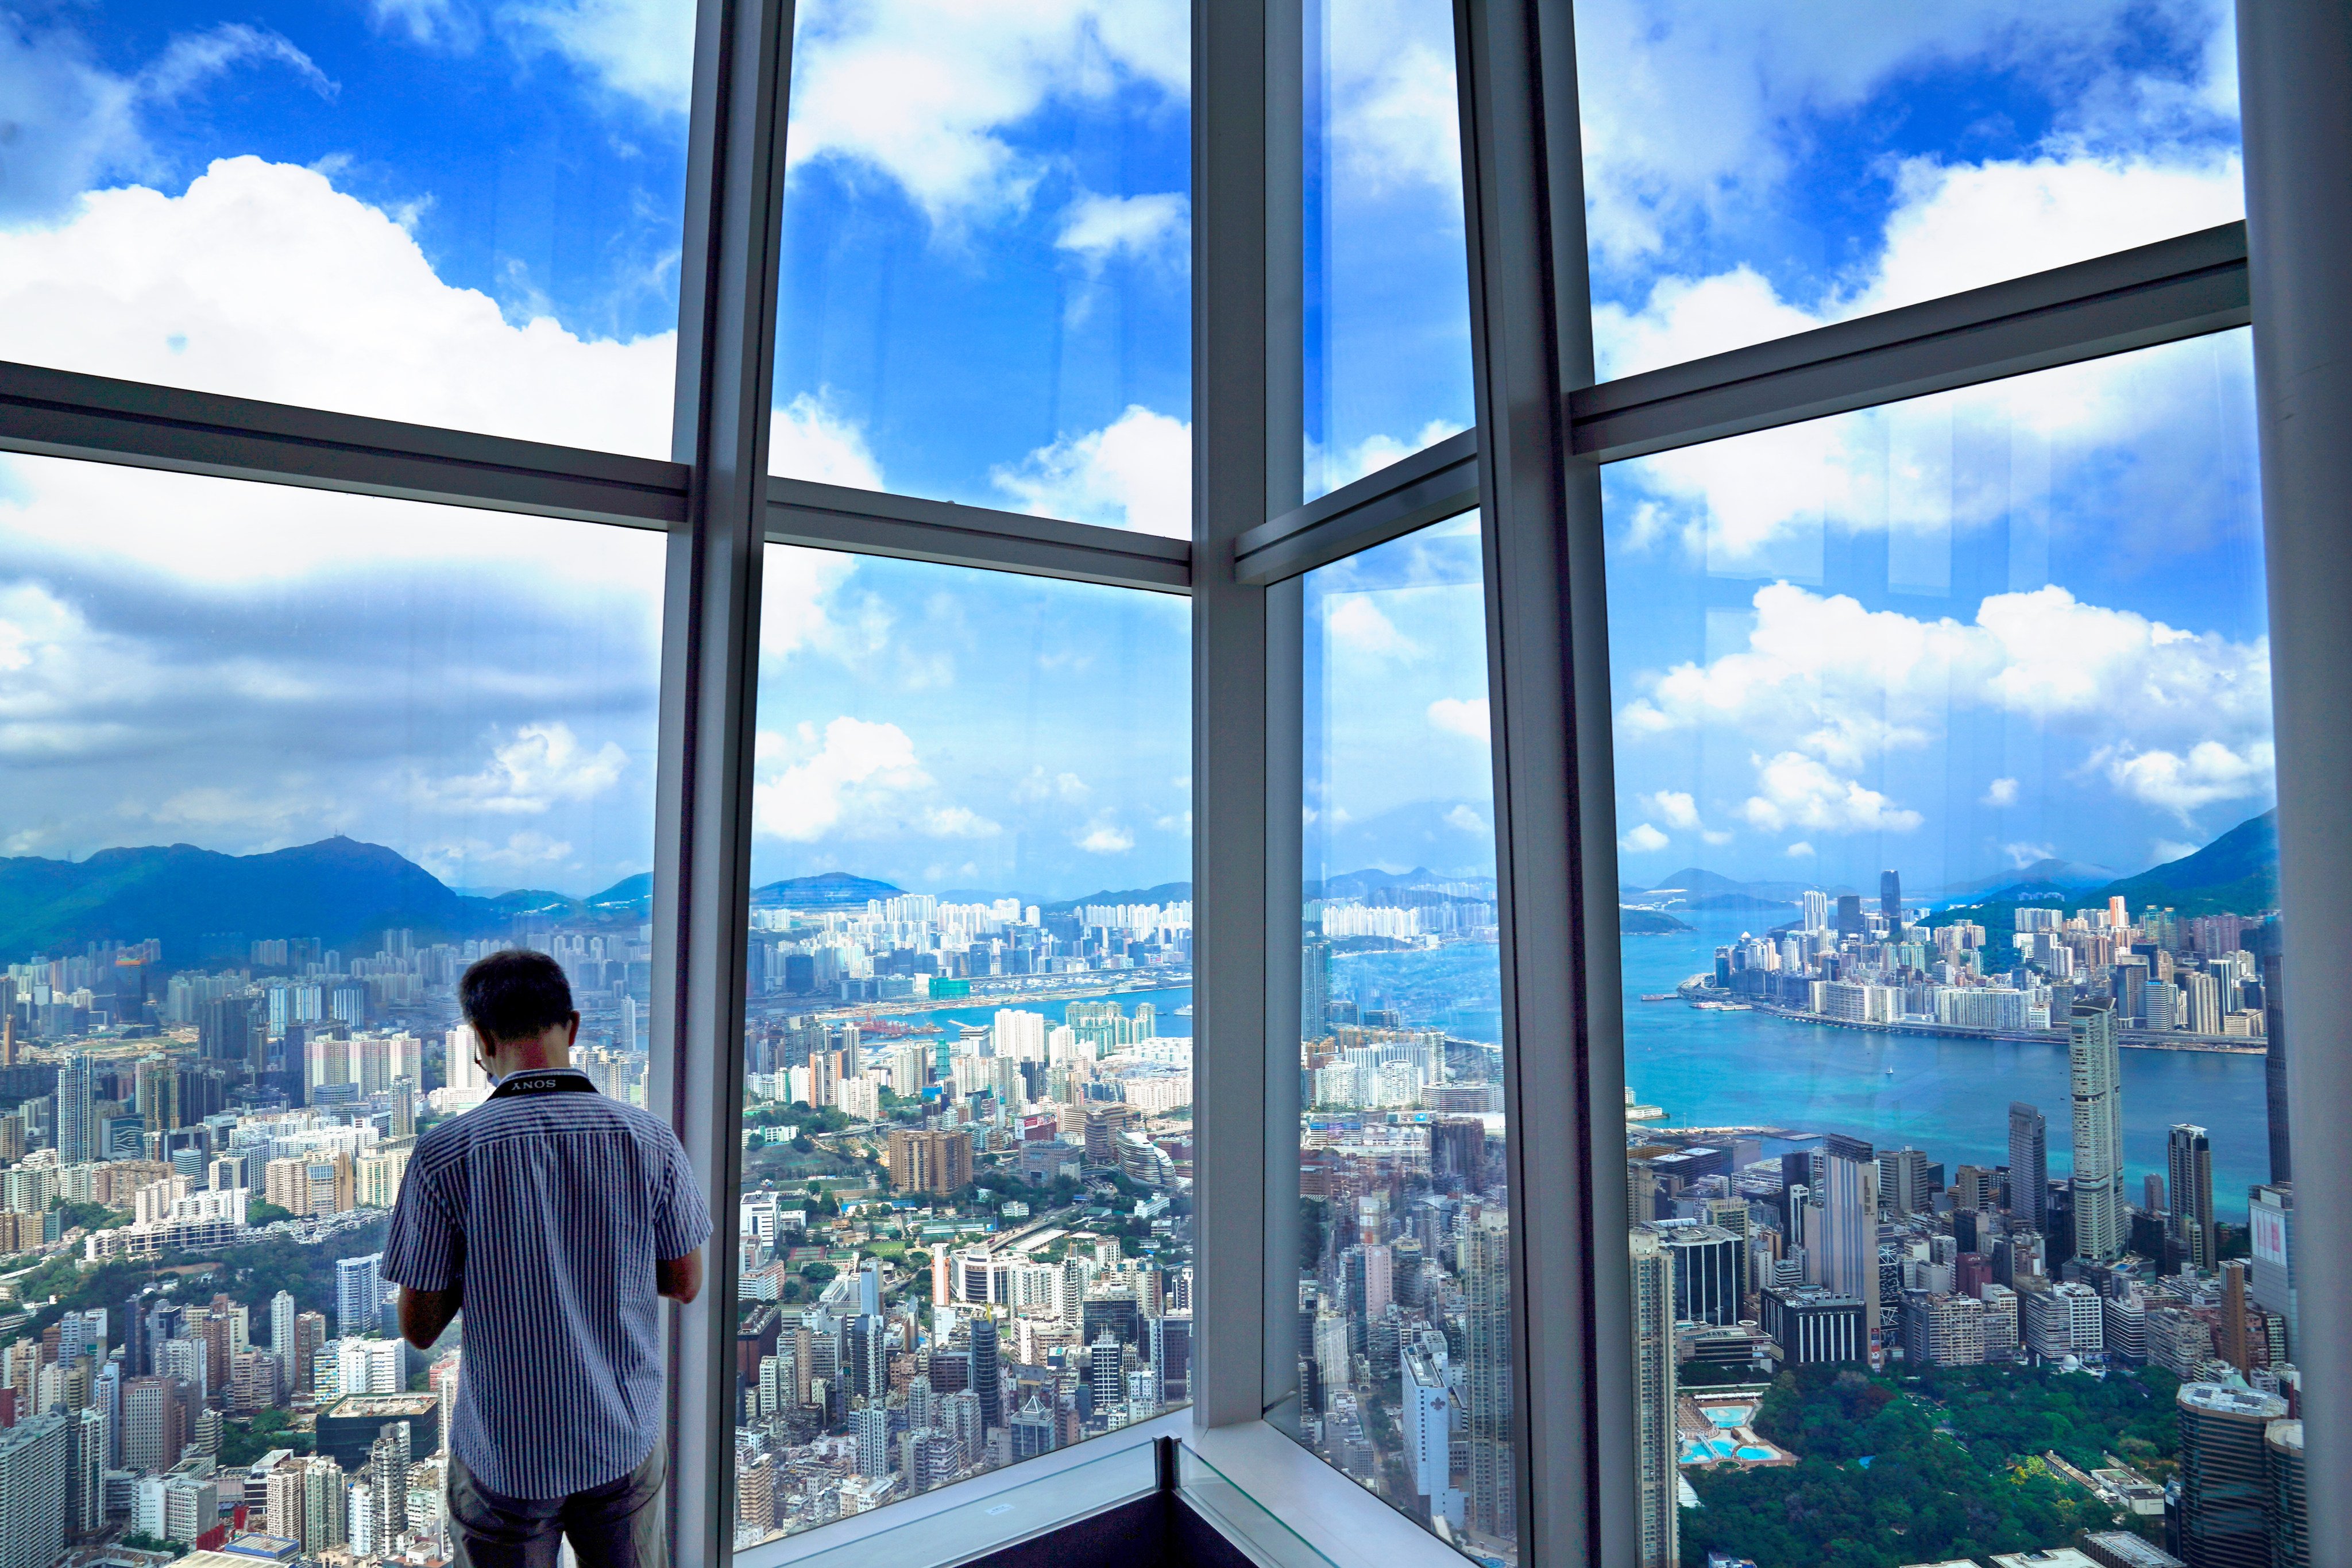 A study of Hong Kong’s affluent demographic suggests its members are continuing to plan ahead to meet their financial goals, despite ongoing economic uncertainty. Photo: SCMP / Sam Tsang
